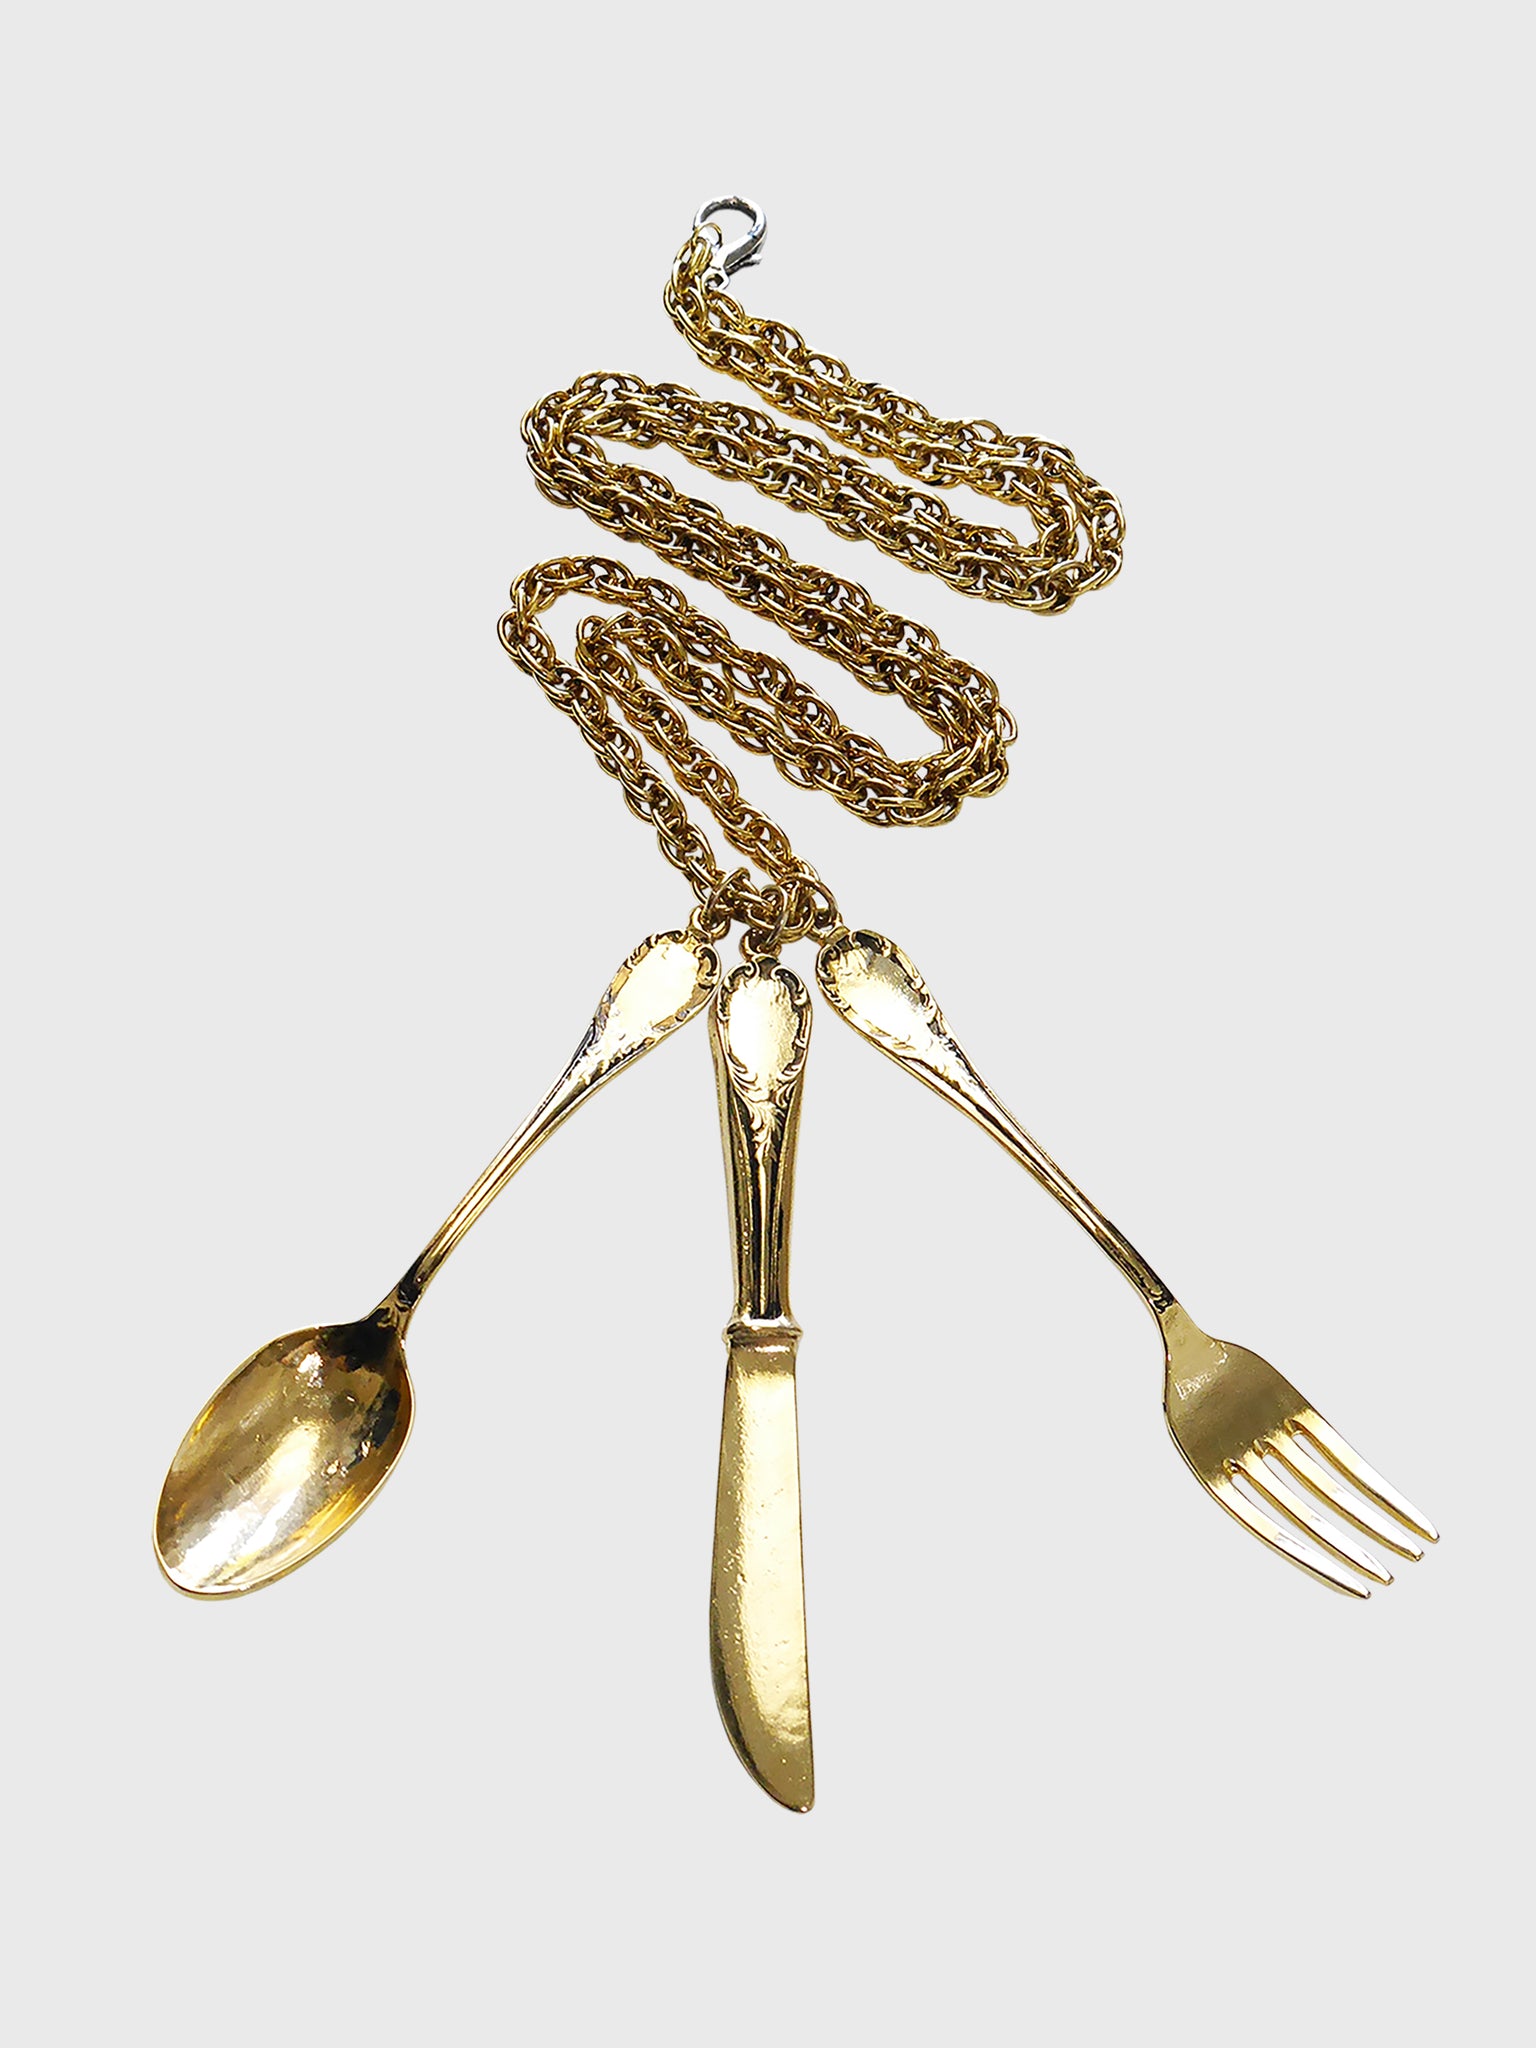 MOSCHINO Fall 1989 Vintage Cutlery Pendant Necklace